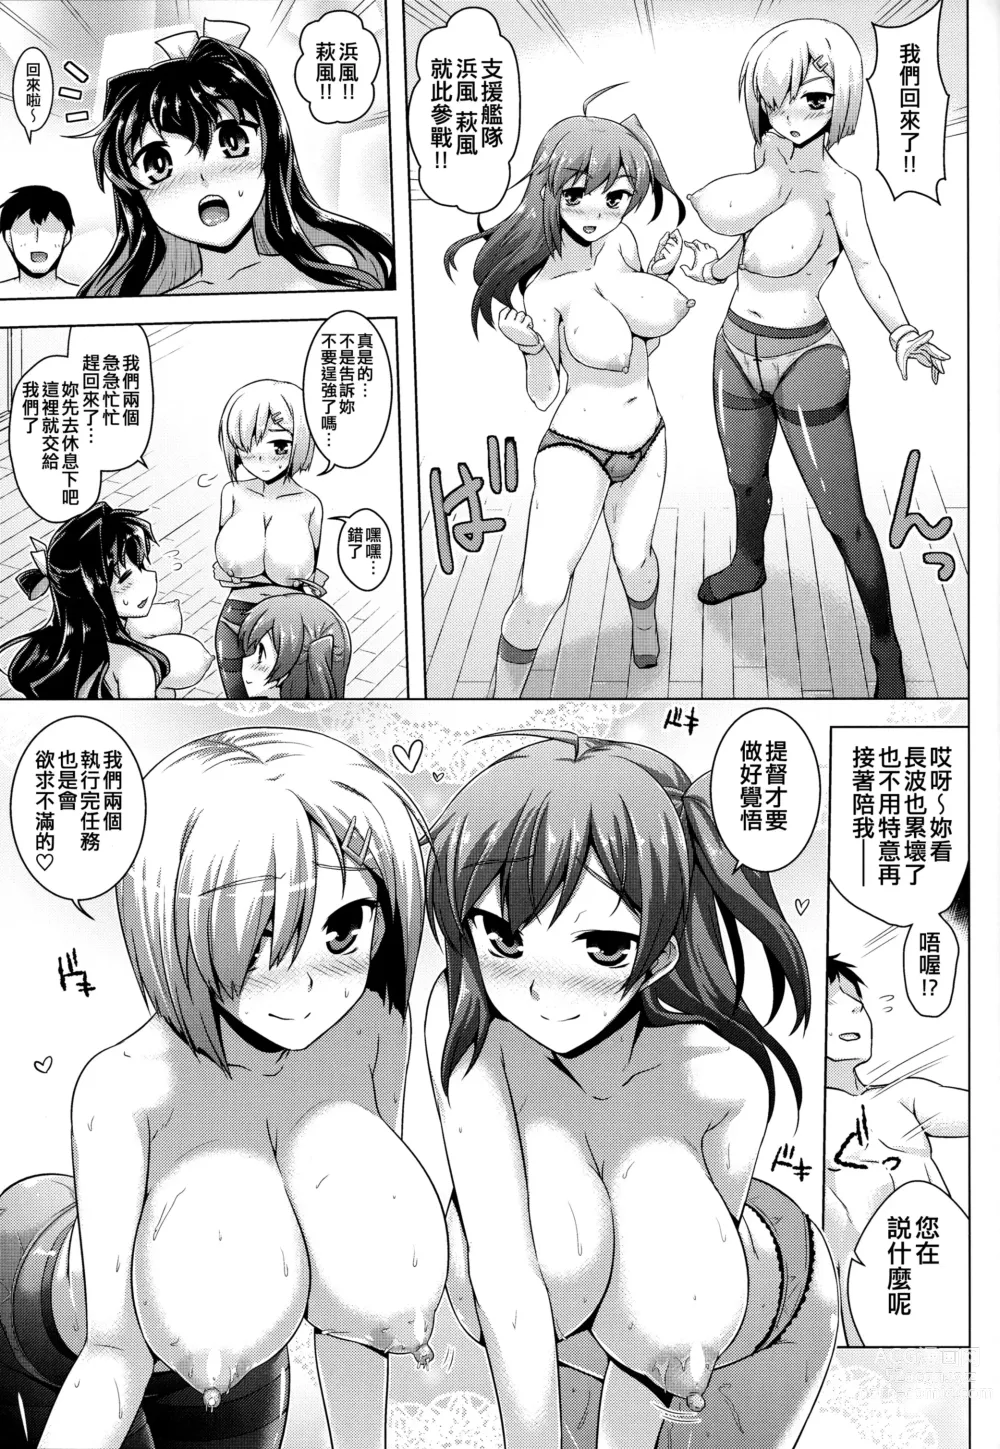 Page 19 of doujinshi Milky DD